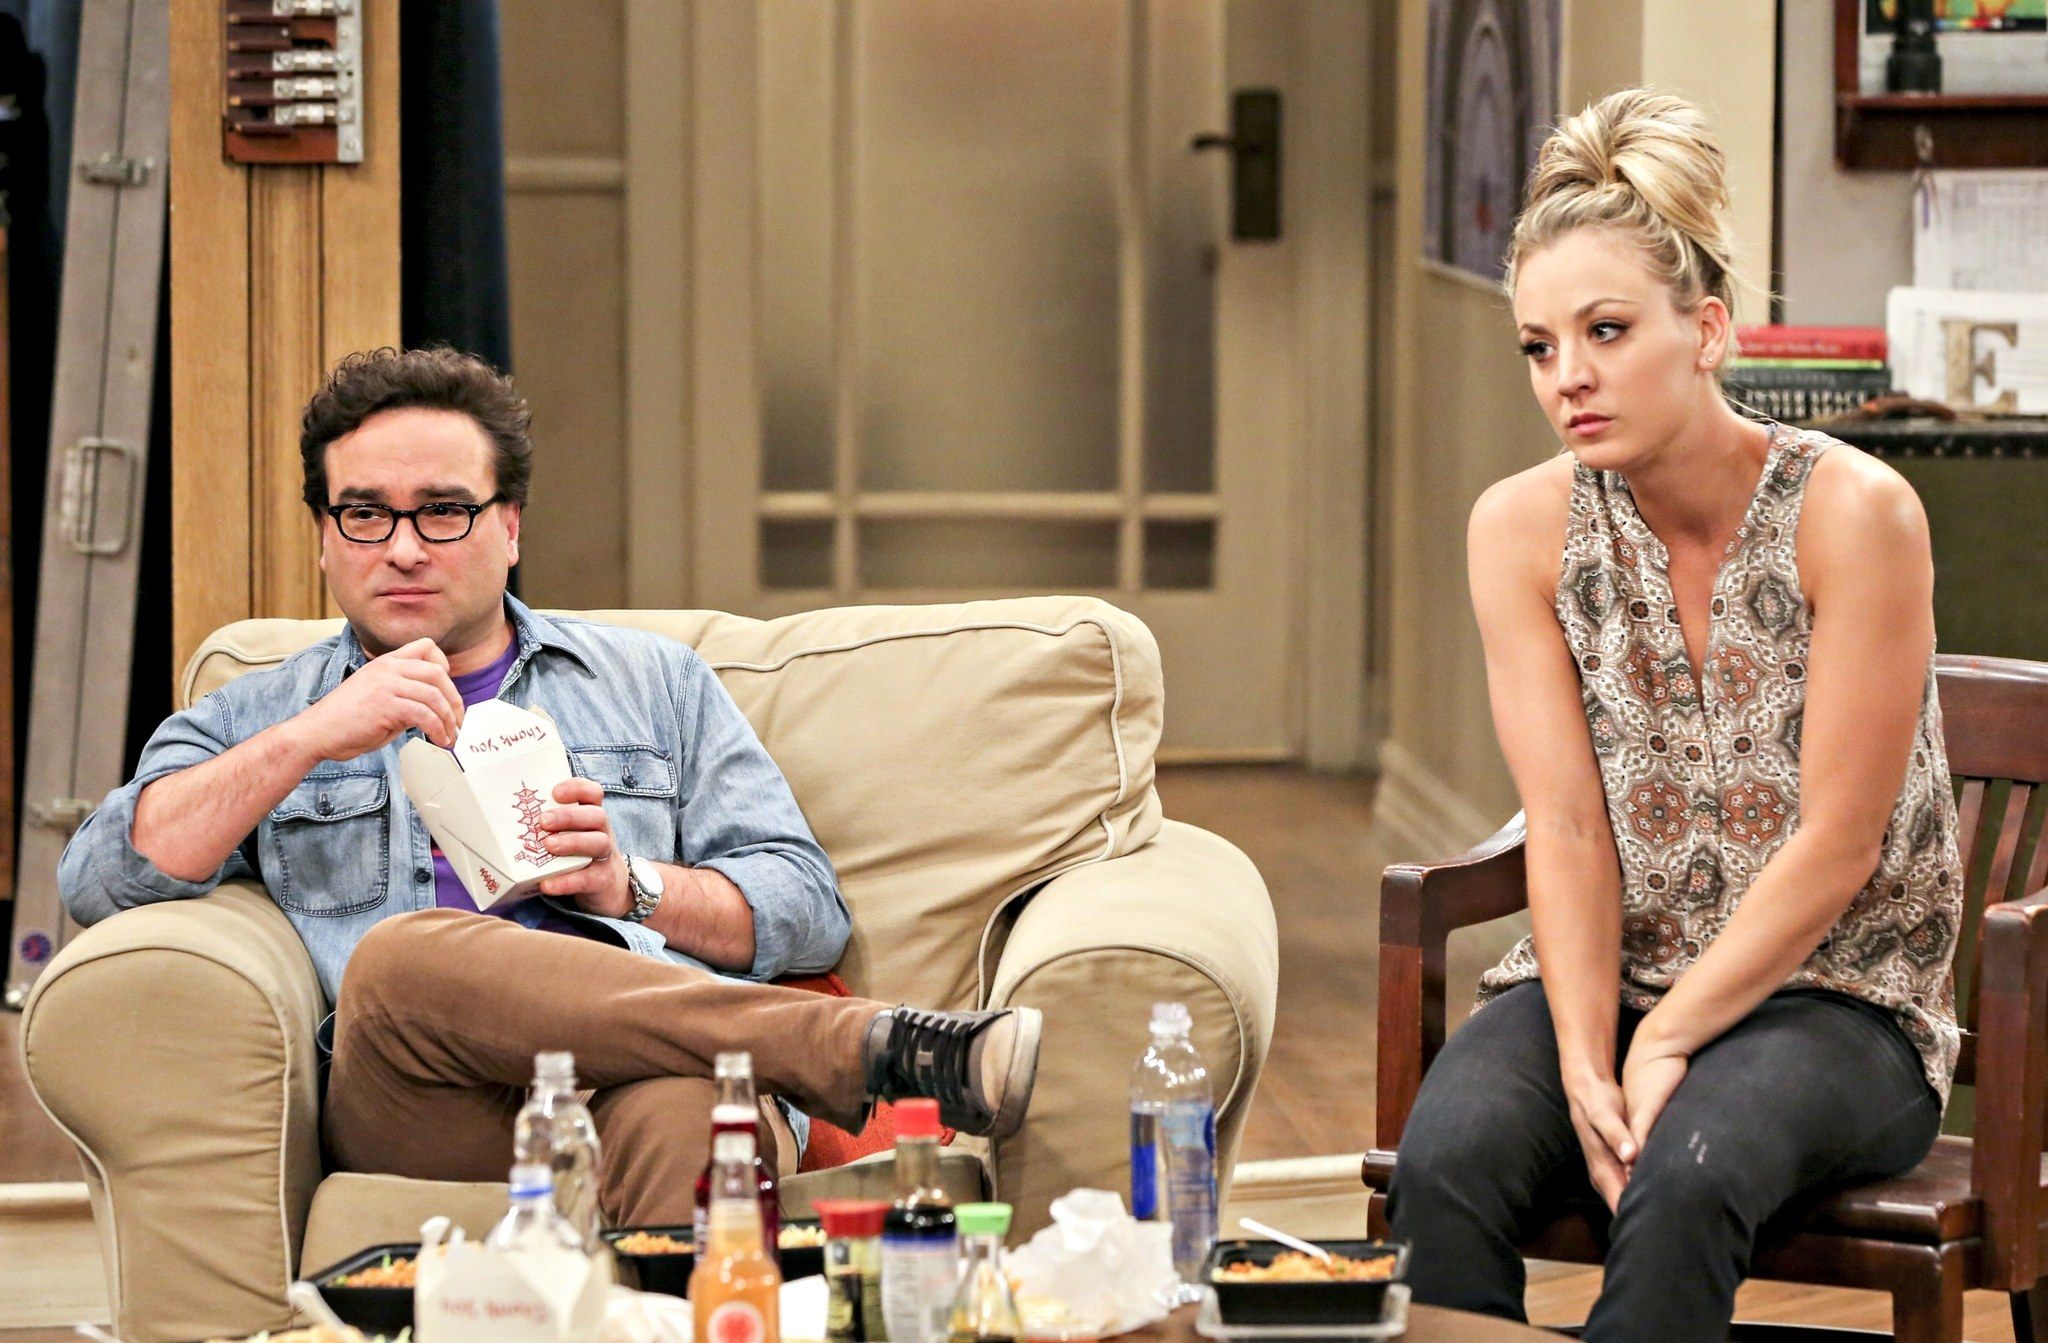 Leonard and Penny sit next to each other while eating Chinese food in 'The Big Bang Theory'.